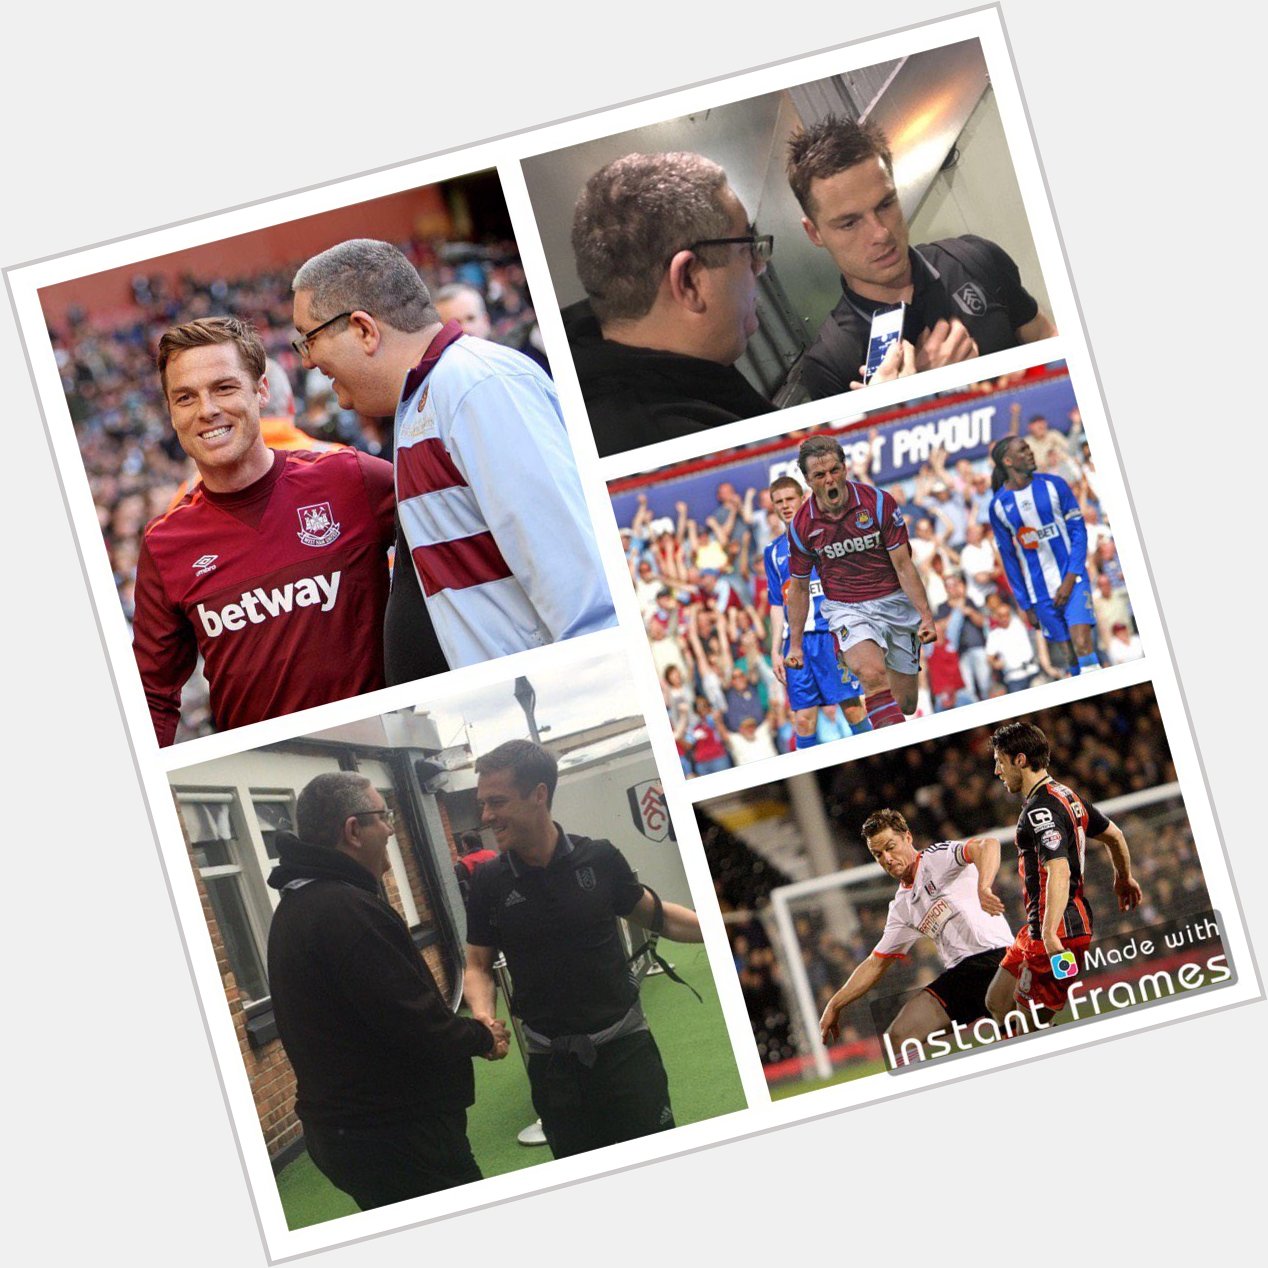 Happy 37th Birthday to my good friend and 3 times Player of the Year Scott Parker - have a great day 